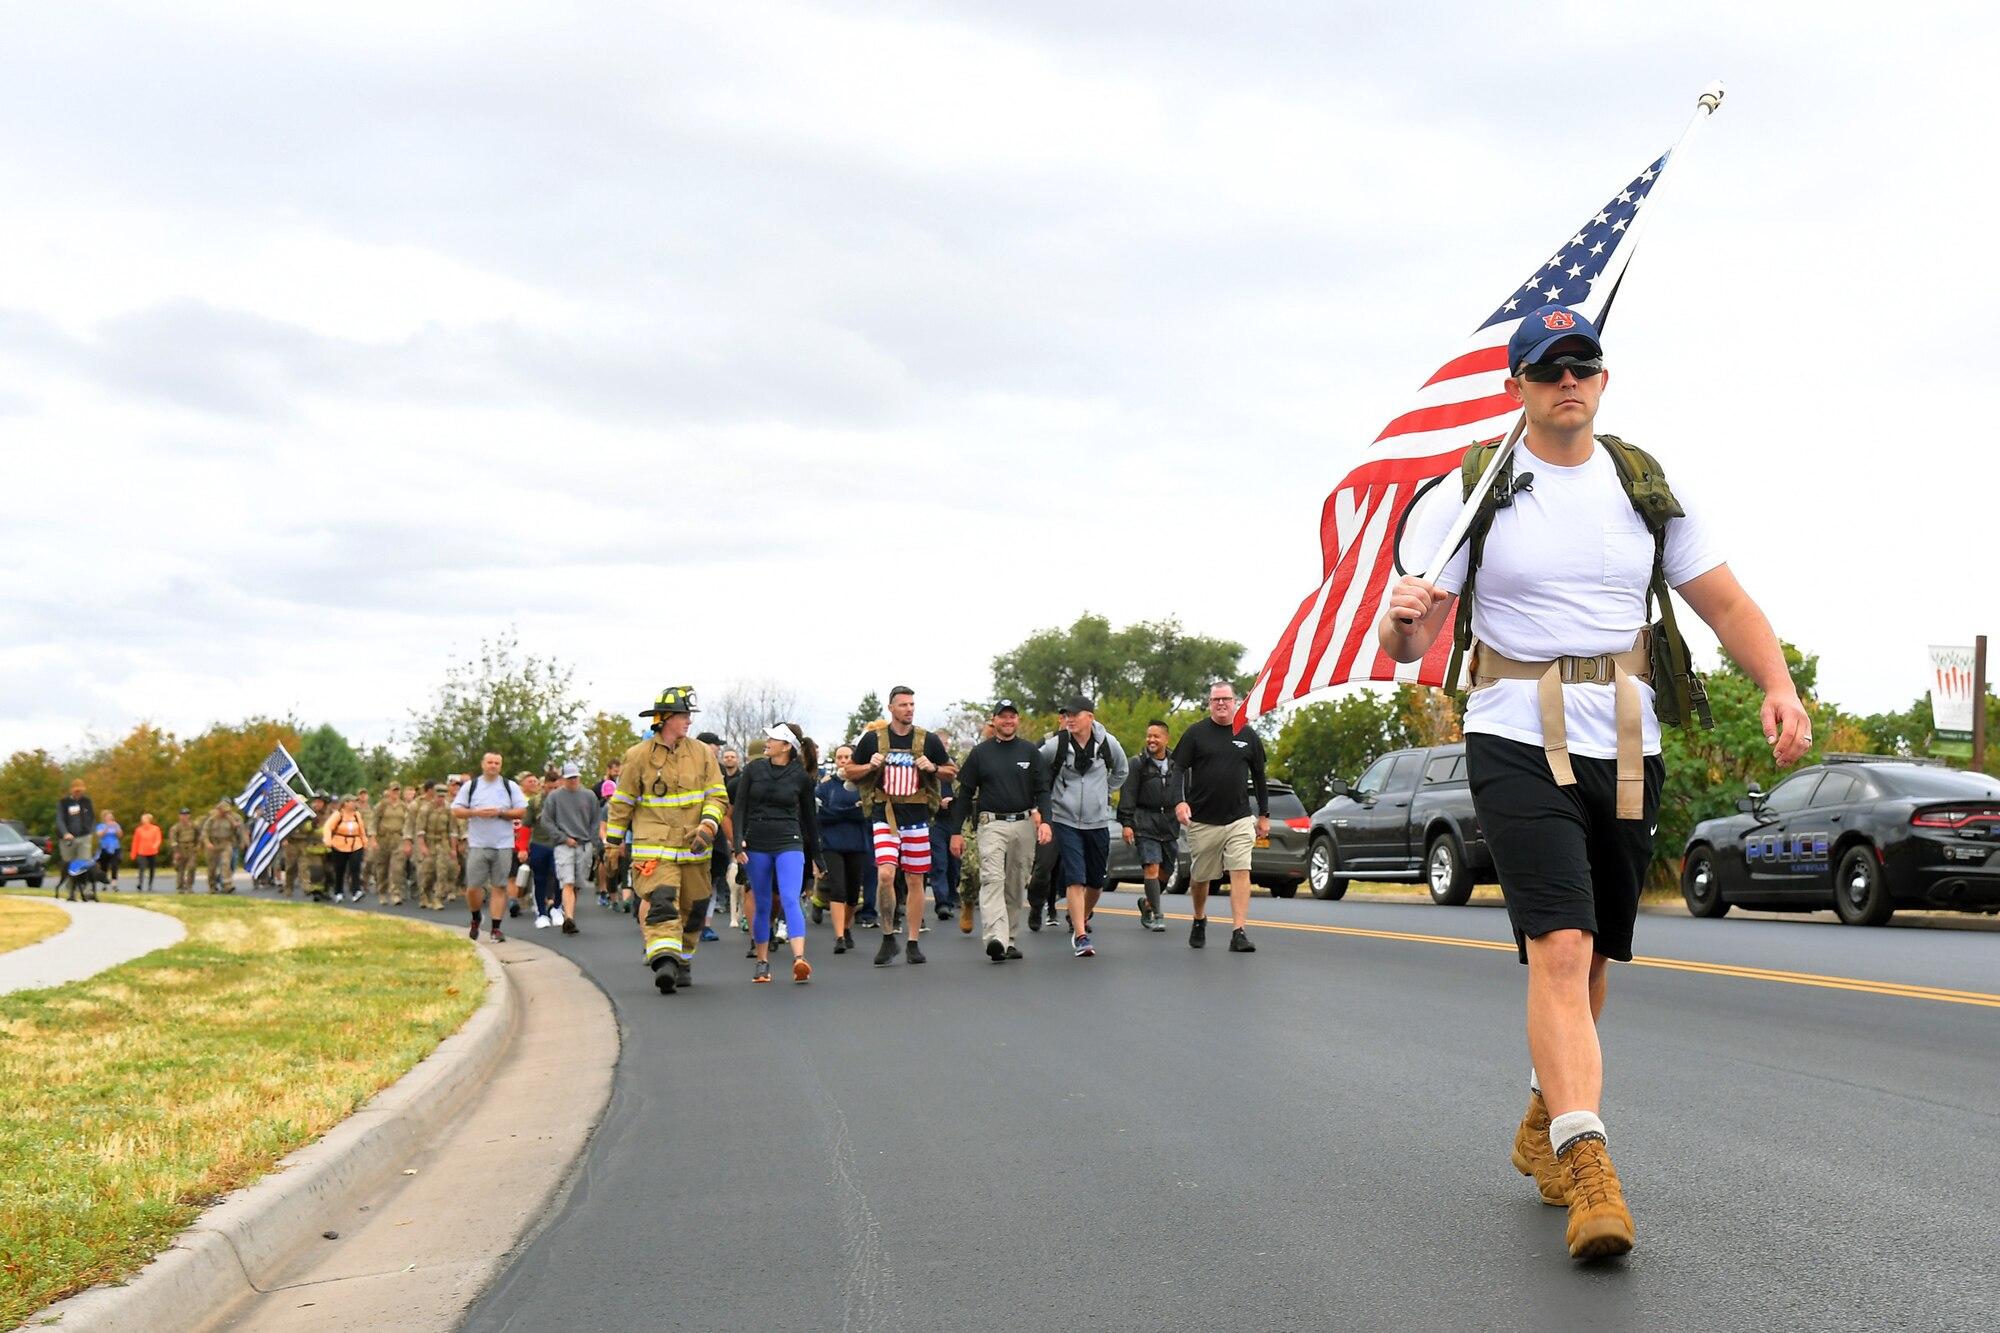 First Lt. John Gandy, Air Force Life Cycle Management Center, leads participants during the 9/11 Memorial Ruck March, in Kaysville, Utah, Sept. 11, 2019. The event was co-sponsored by Hill Air Force Base first responders and fire and police departments from Kaysville and Layton, to honor and remember the fallen from the events of Sept. 11, 2001. (U.S. Air Force photo by Todd Cromar)